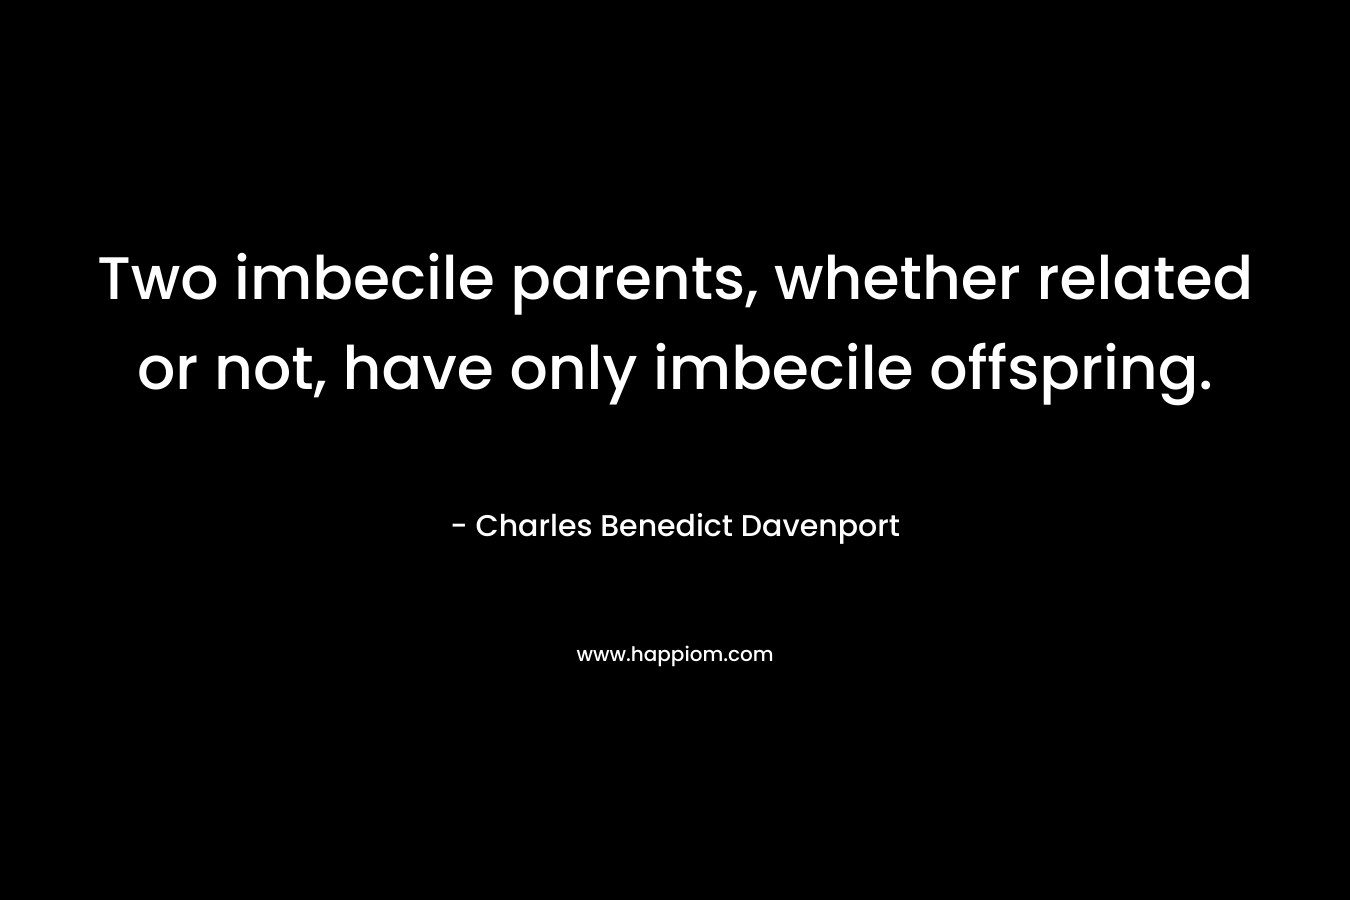 Two imbecile parents, whether related or not, have only imbecile offspring.